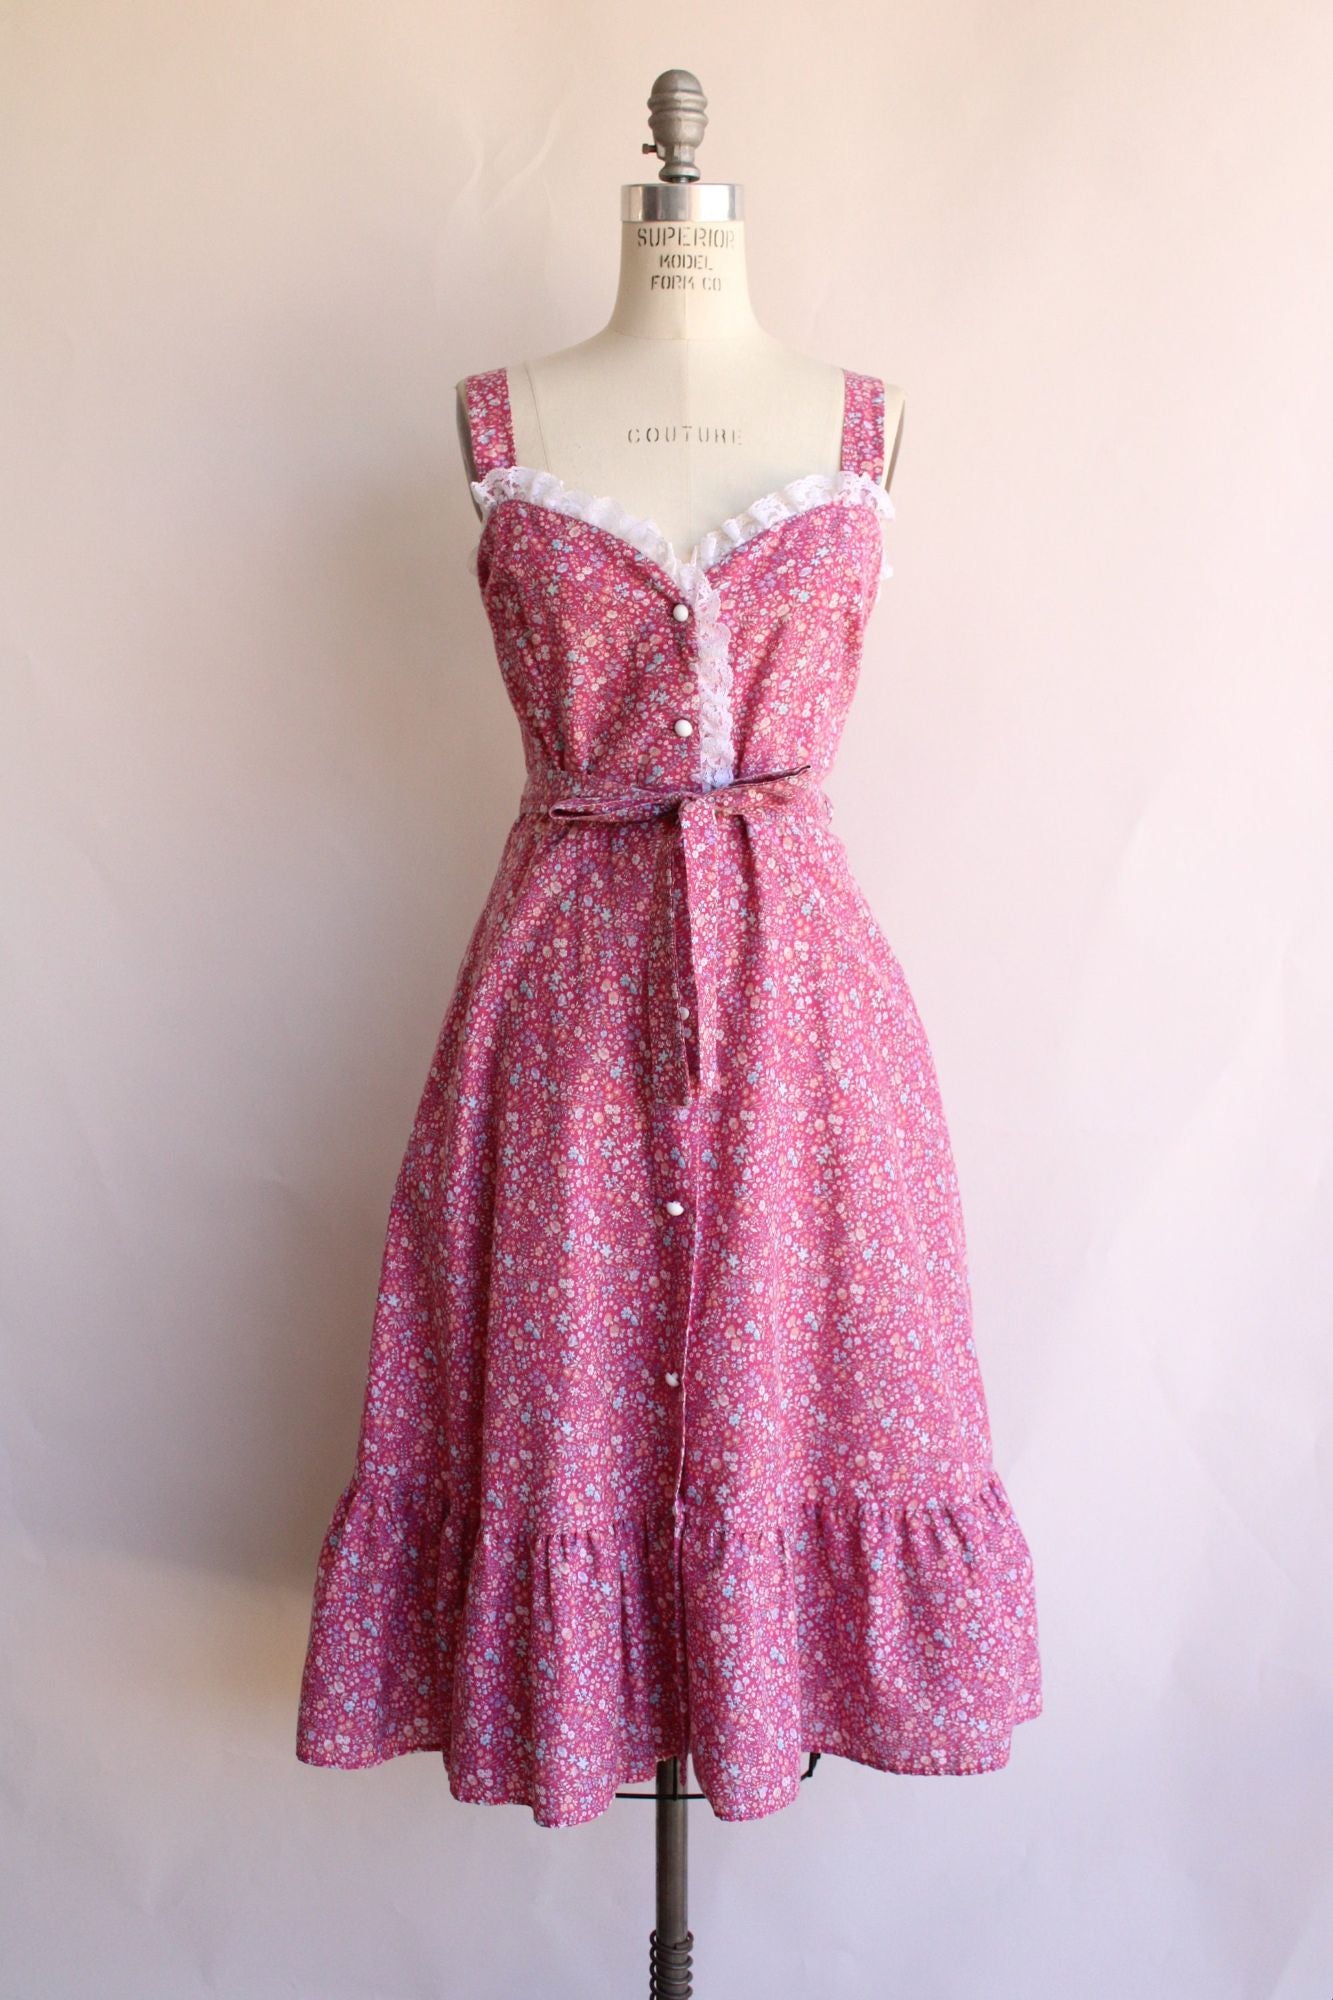 Vintage 1970s 1980s Pink Floral Calico Sundress with Pockets